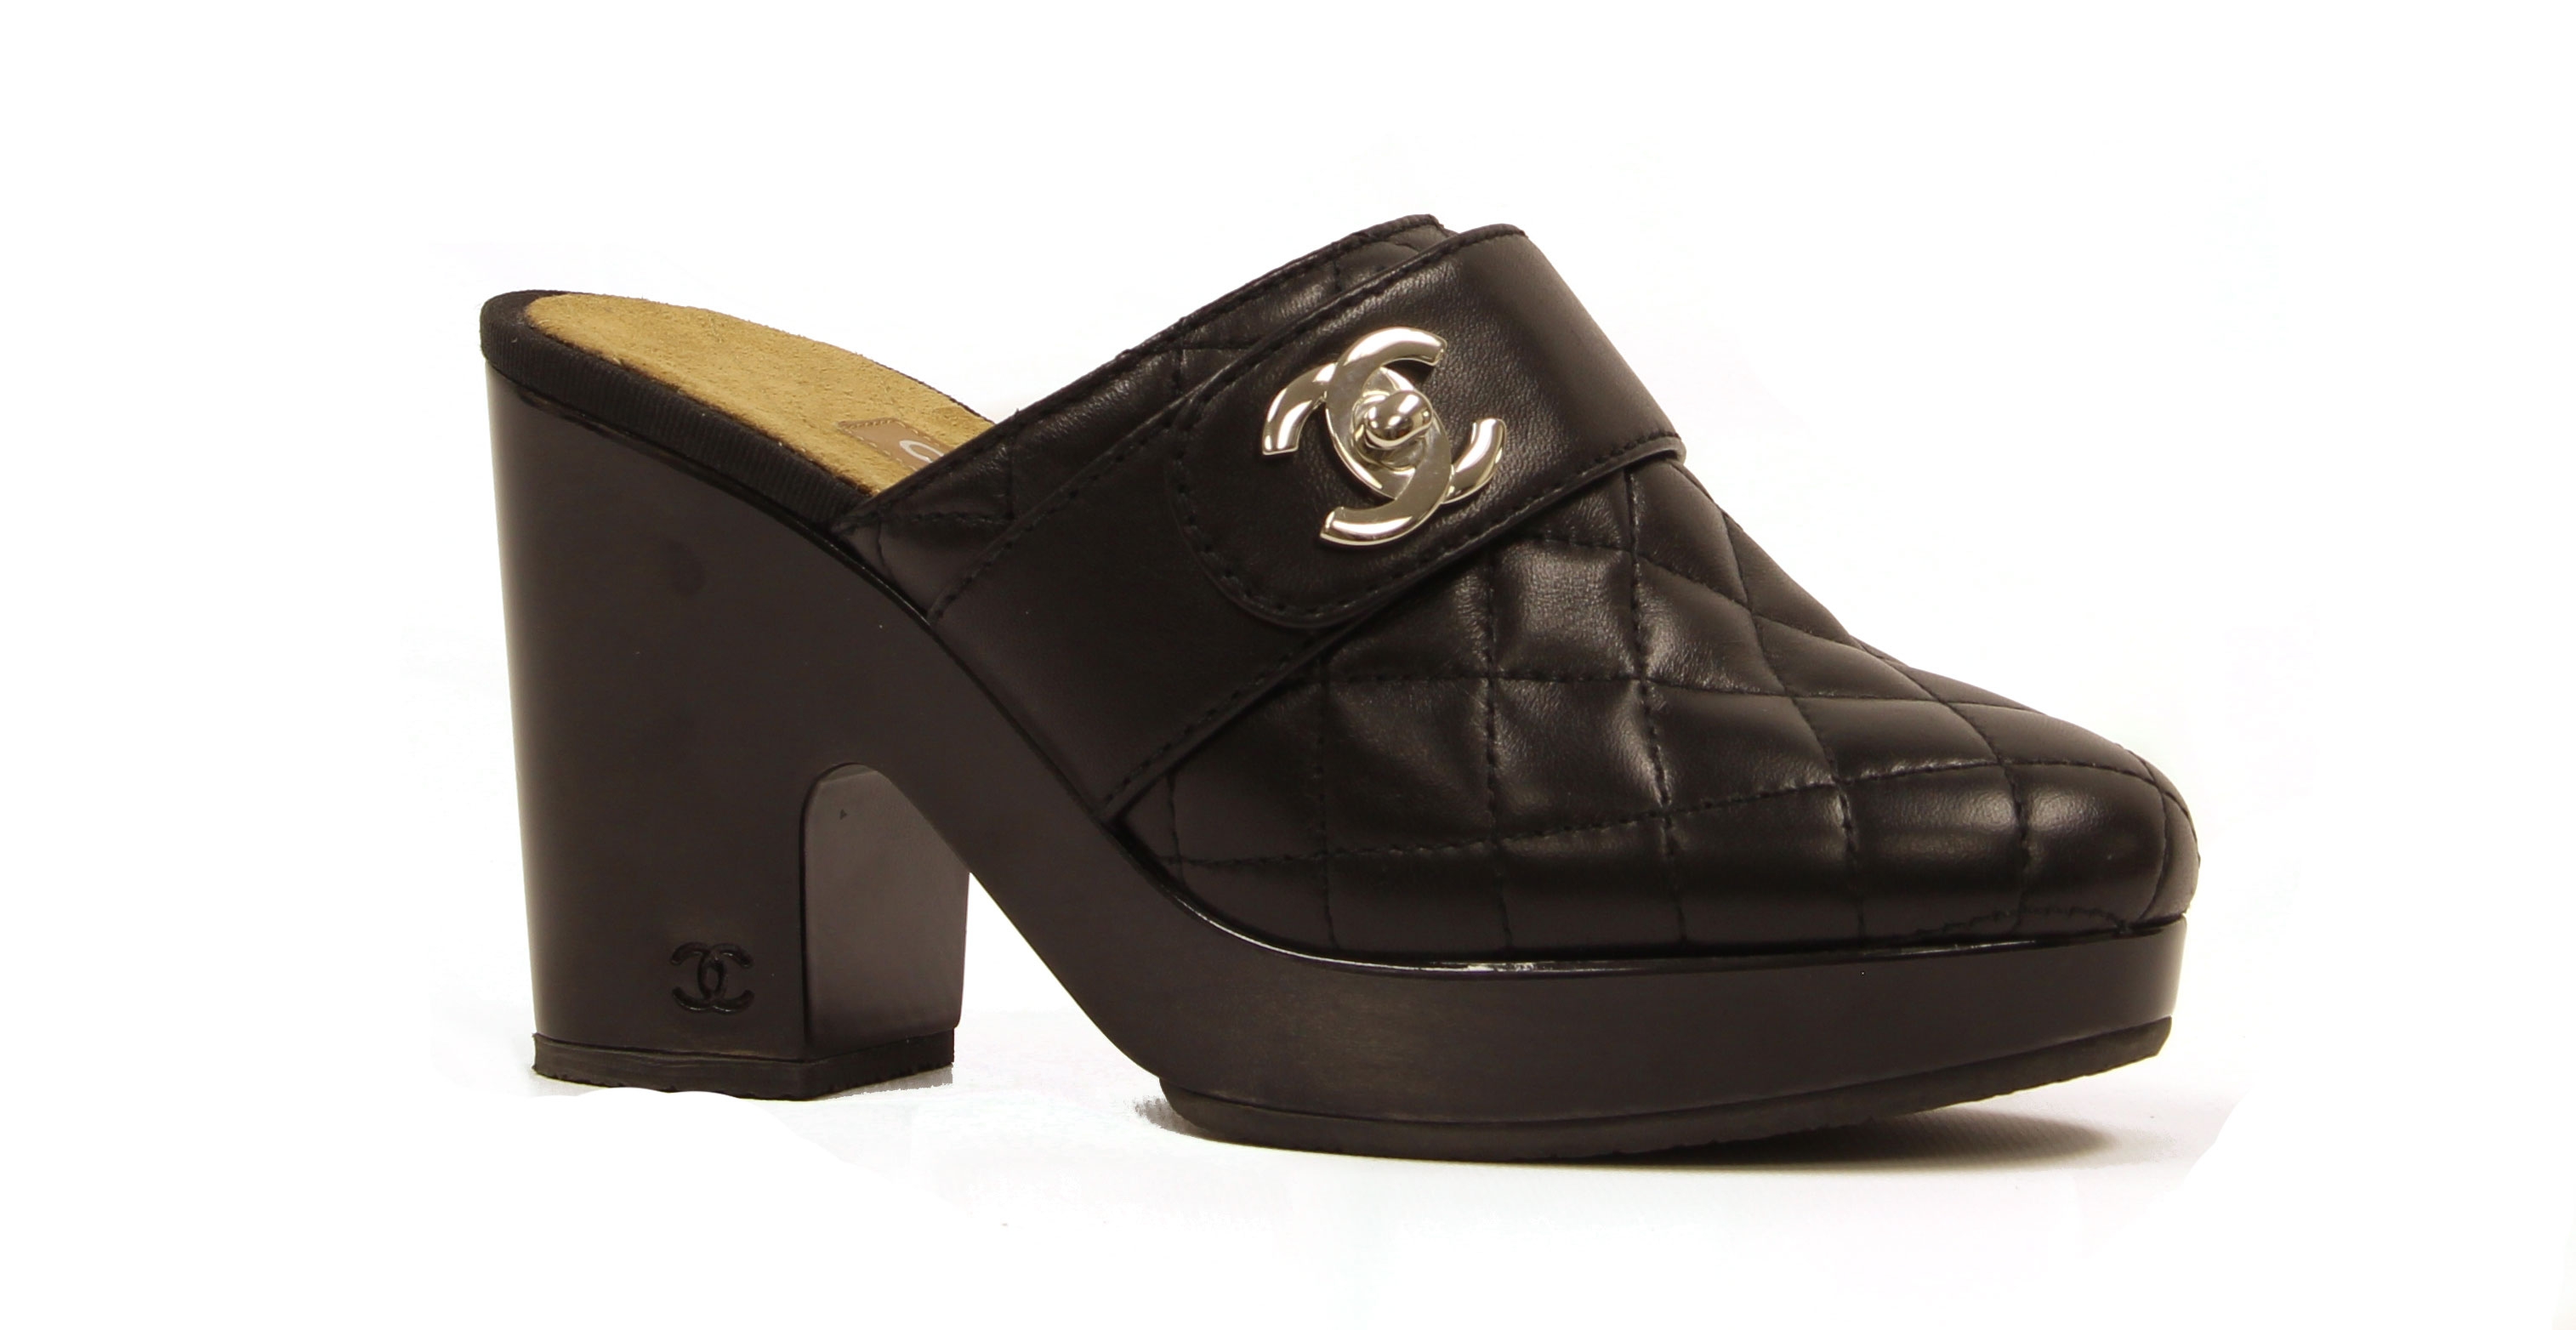 Chanel Black Leather Quilted Clogs w. CC Twist Lock at the best price